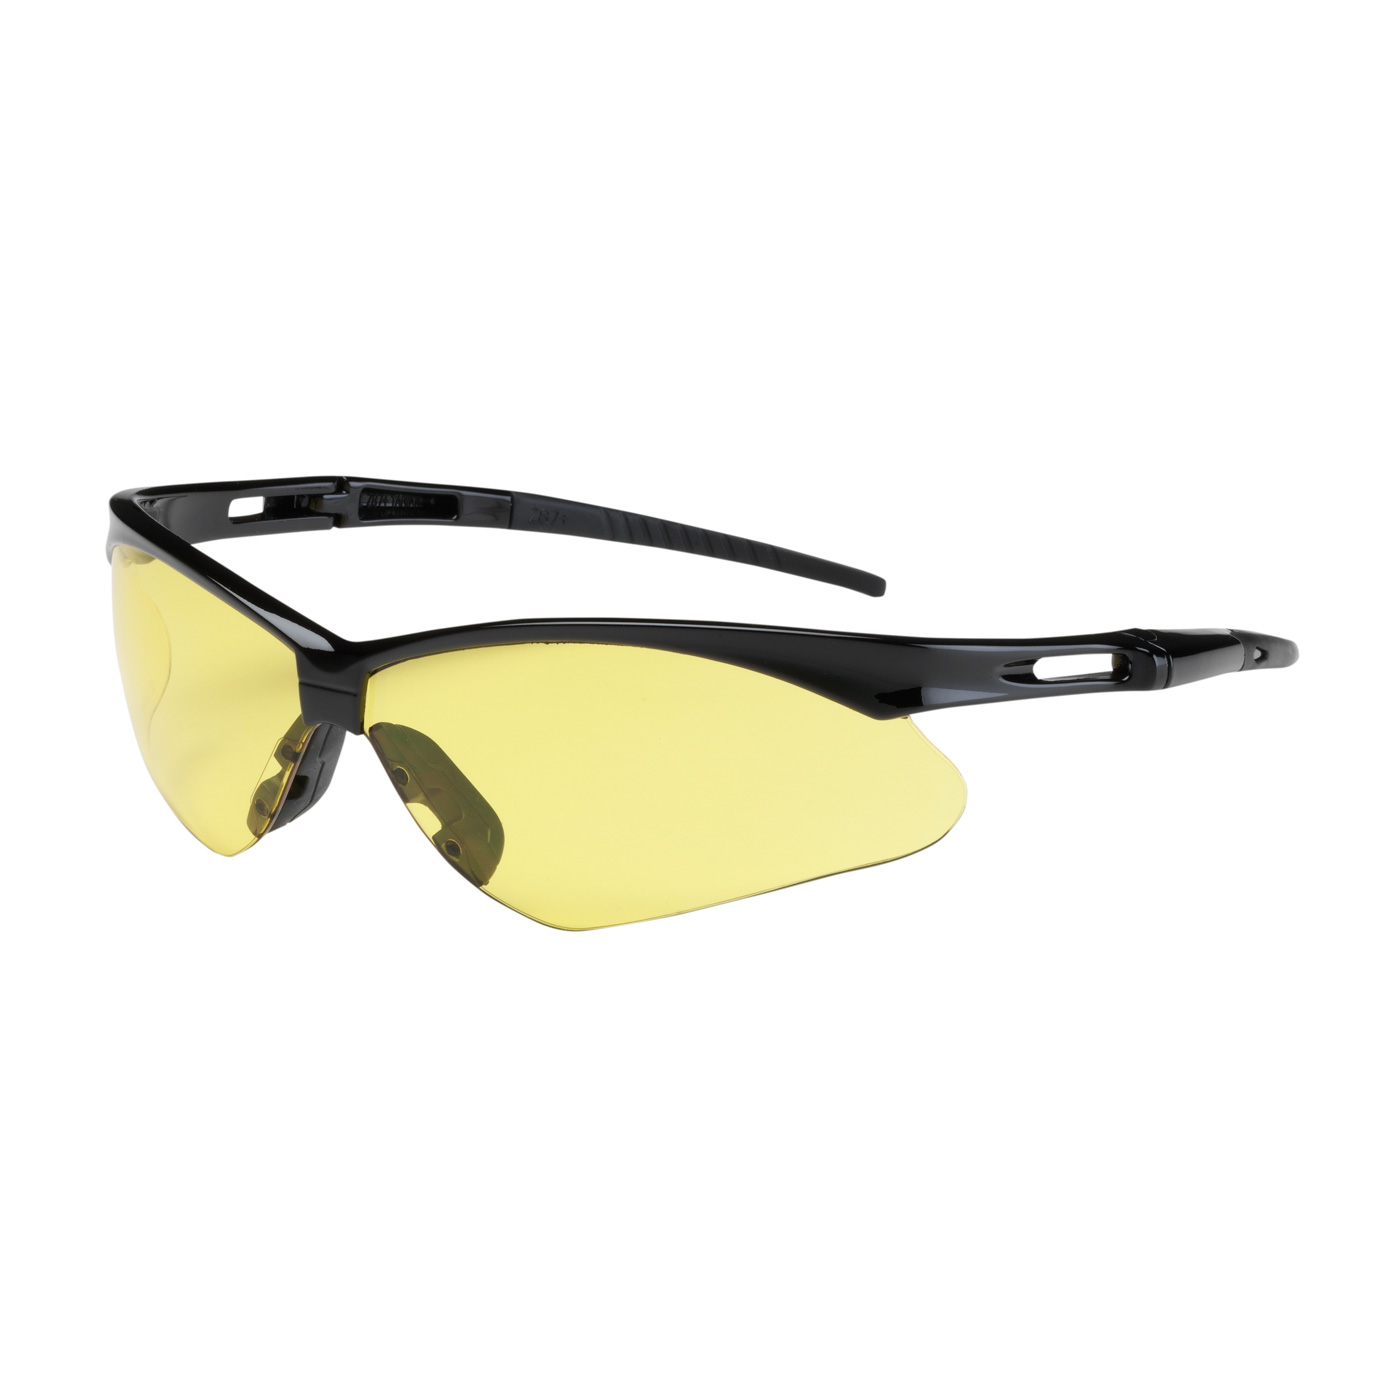 PIP 250-AN-10120 Anser Semi-Rimless Safety Glasses with Black Frame, Amber Lens and Anti-Scratch Coating PID-250 AN 10120